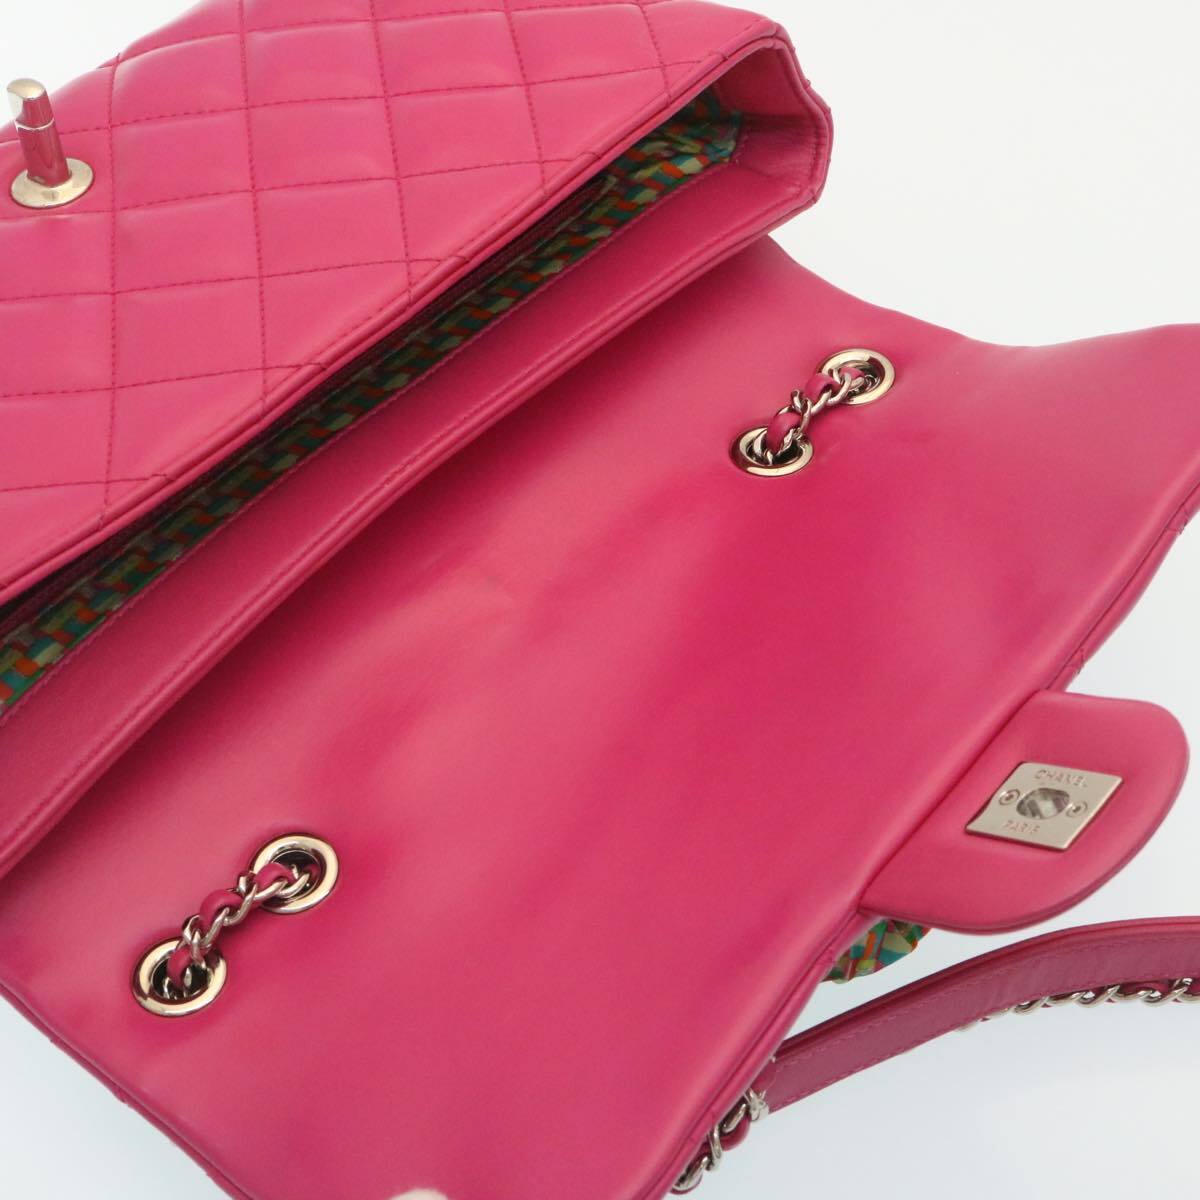 Chanel Pink Leather Flap Bag